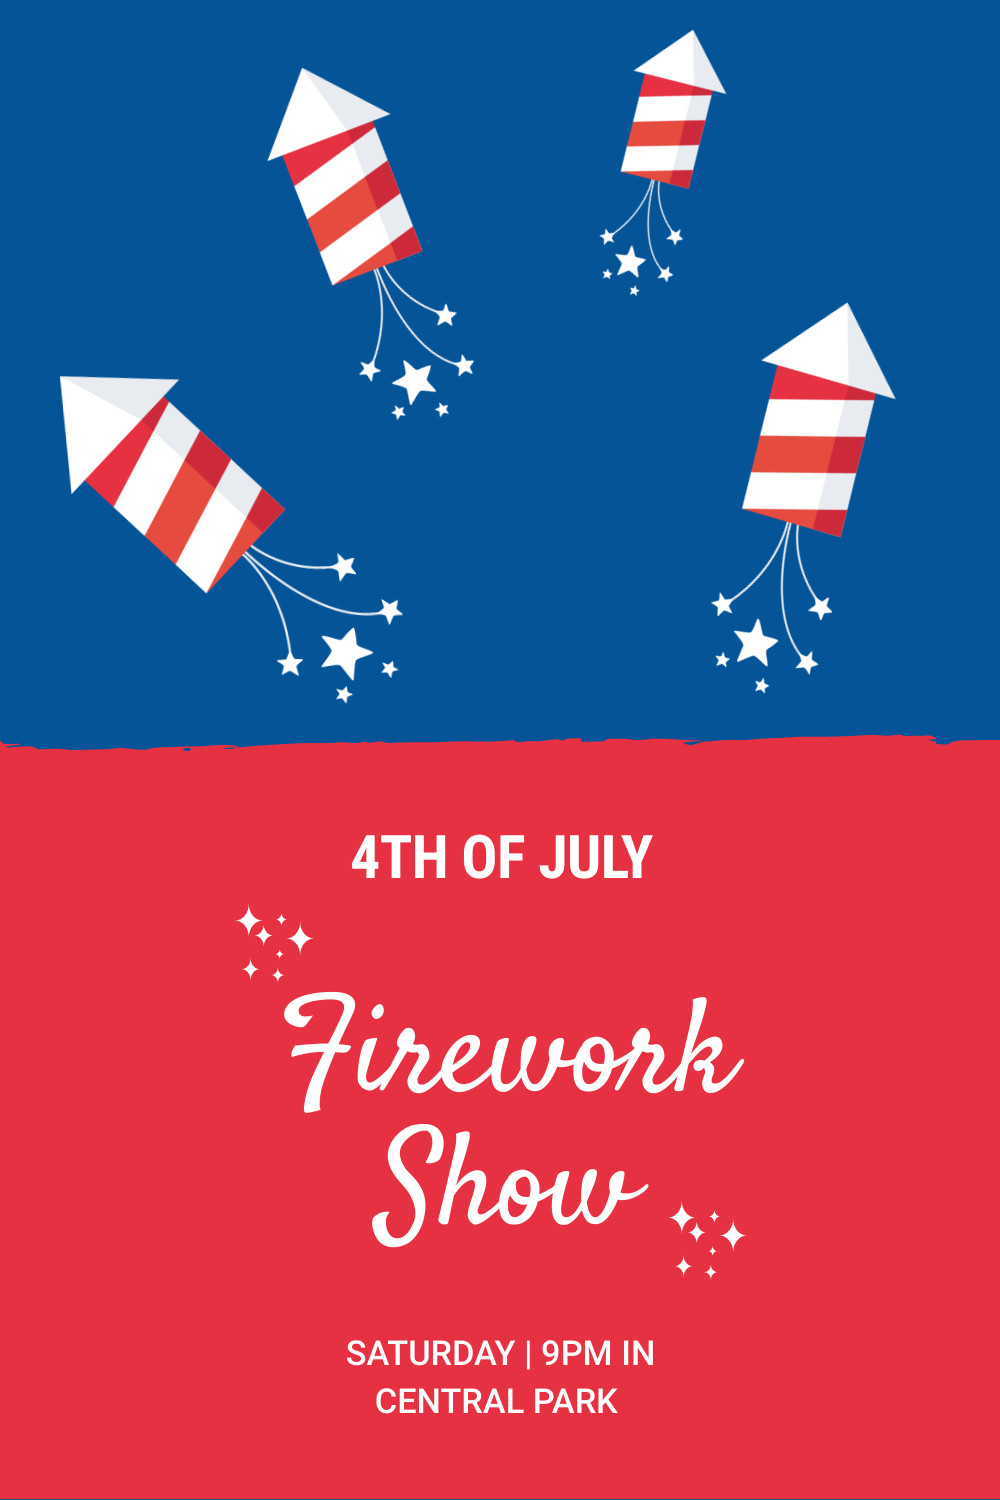 4th of July Firework Show Facebook Cover 820x360